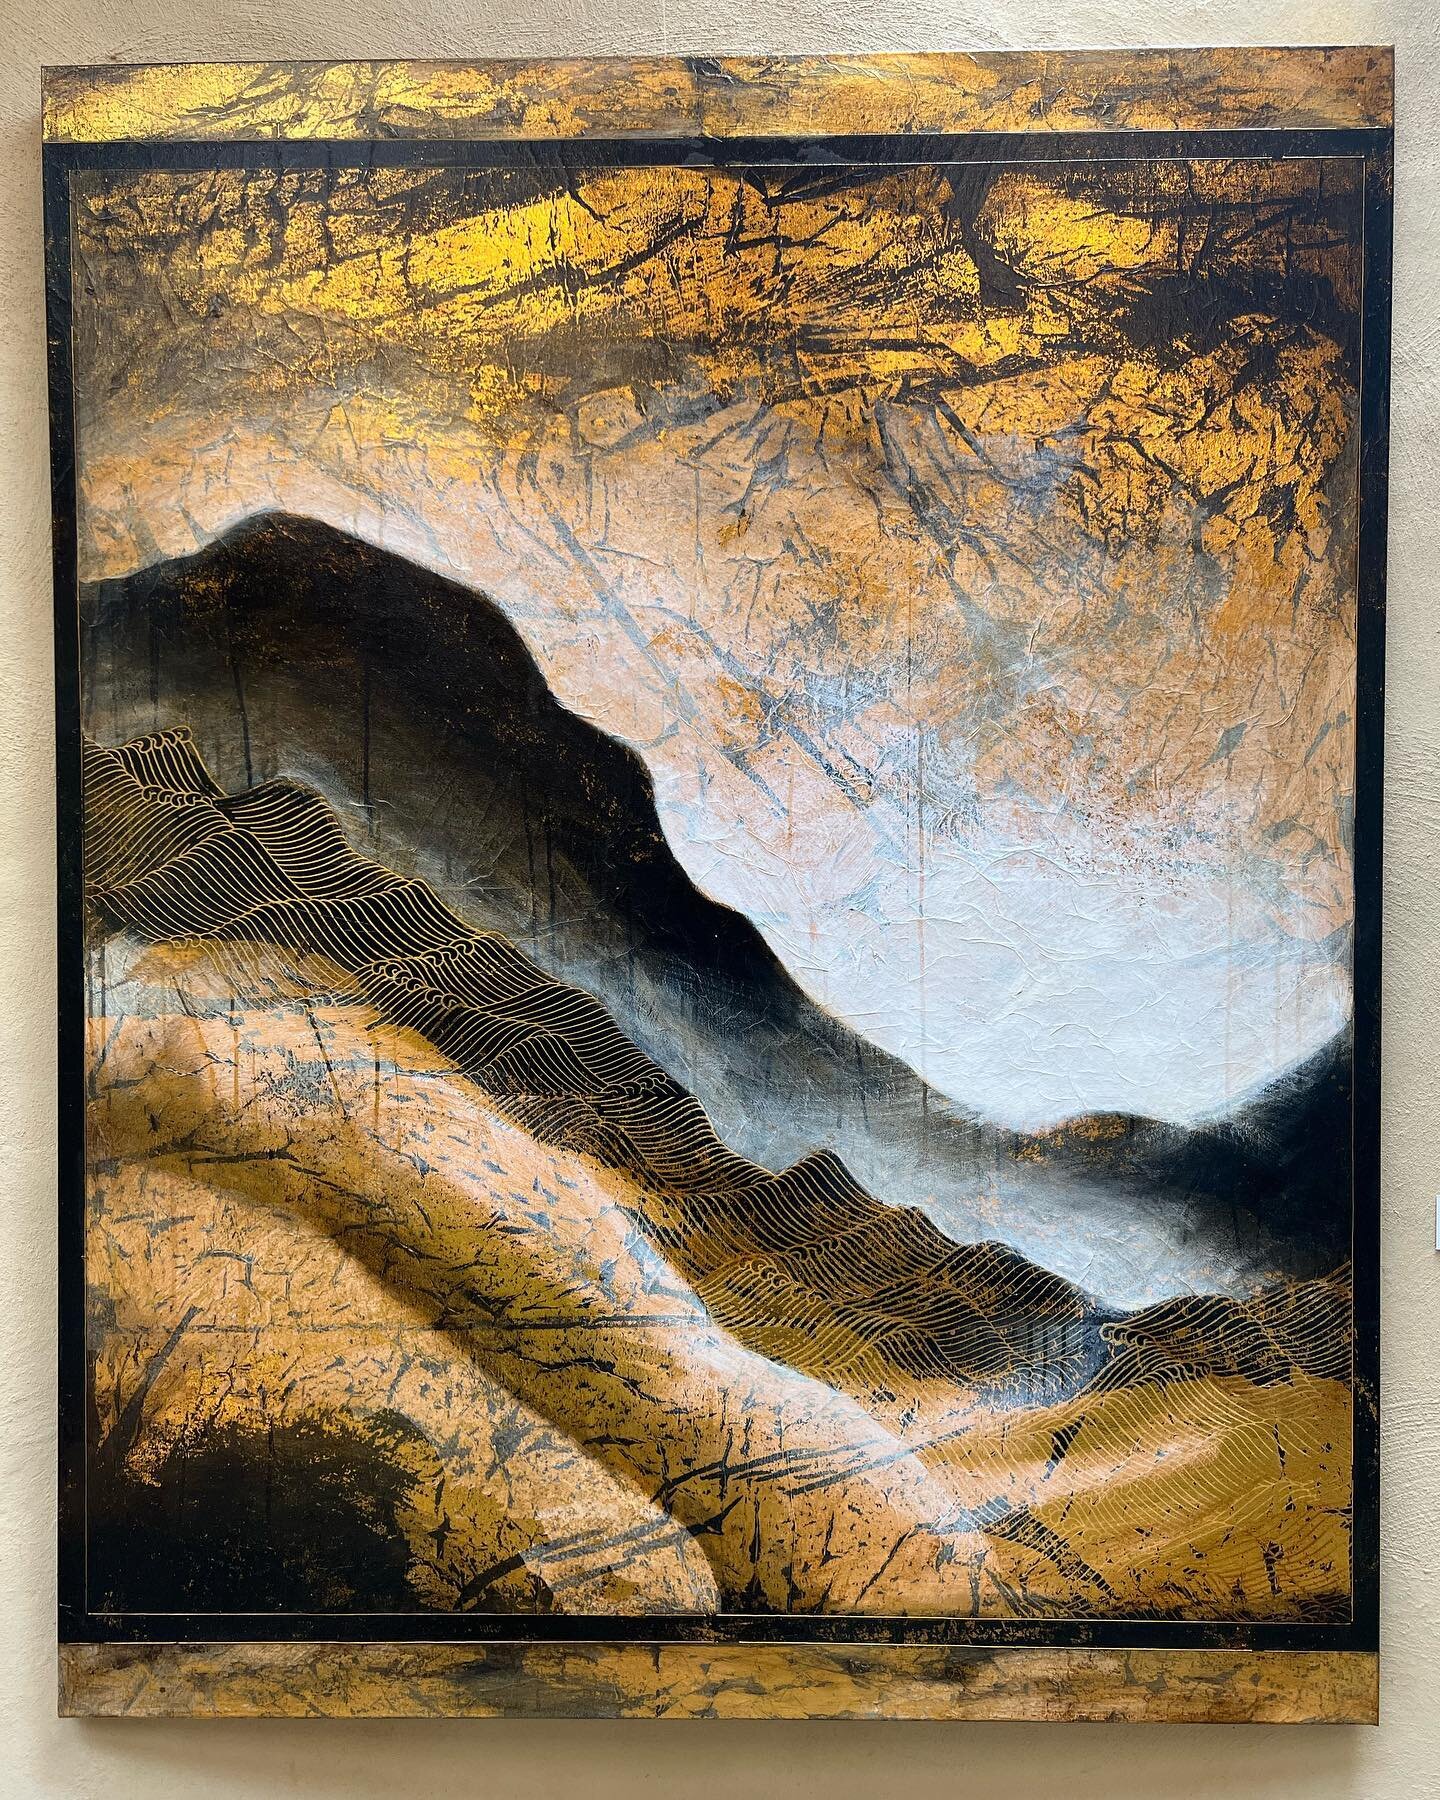 &quot;Time and again you too
must long for your old nest
deep in the mountain&quot;
&nbsp;- Ryokan Taigu 1758 - 1831 

152cm x 122cm
Cold foil, metallic leaf, tissue, screen print, and acrylic on canvas.

This painting is on display in my studio whic